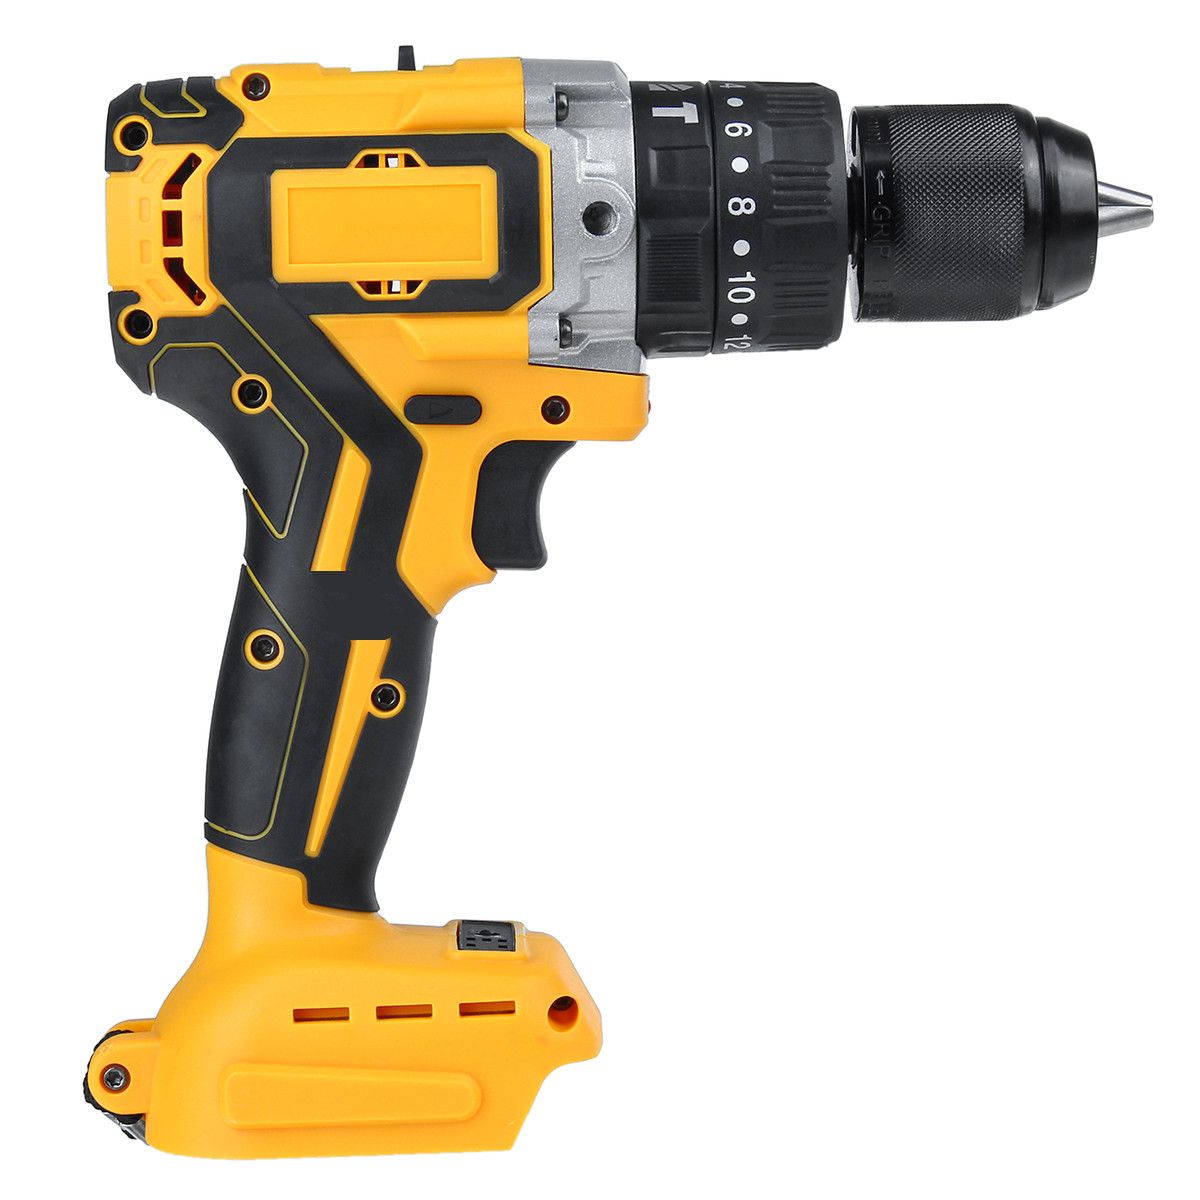 18V-Electric-Impact-Drill-13mm-4000RPM-Brushless-Electric-Screwdriver-for-Makita-Battery-1724290